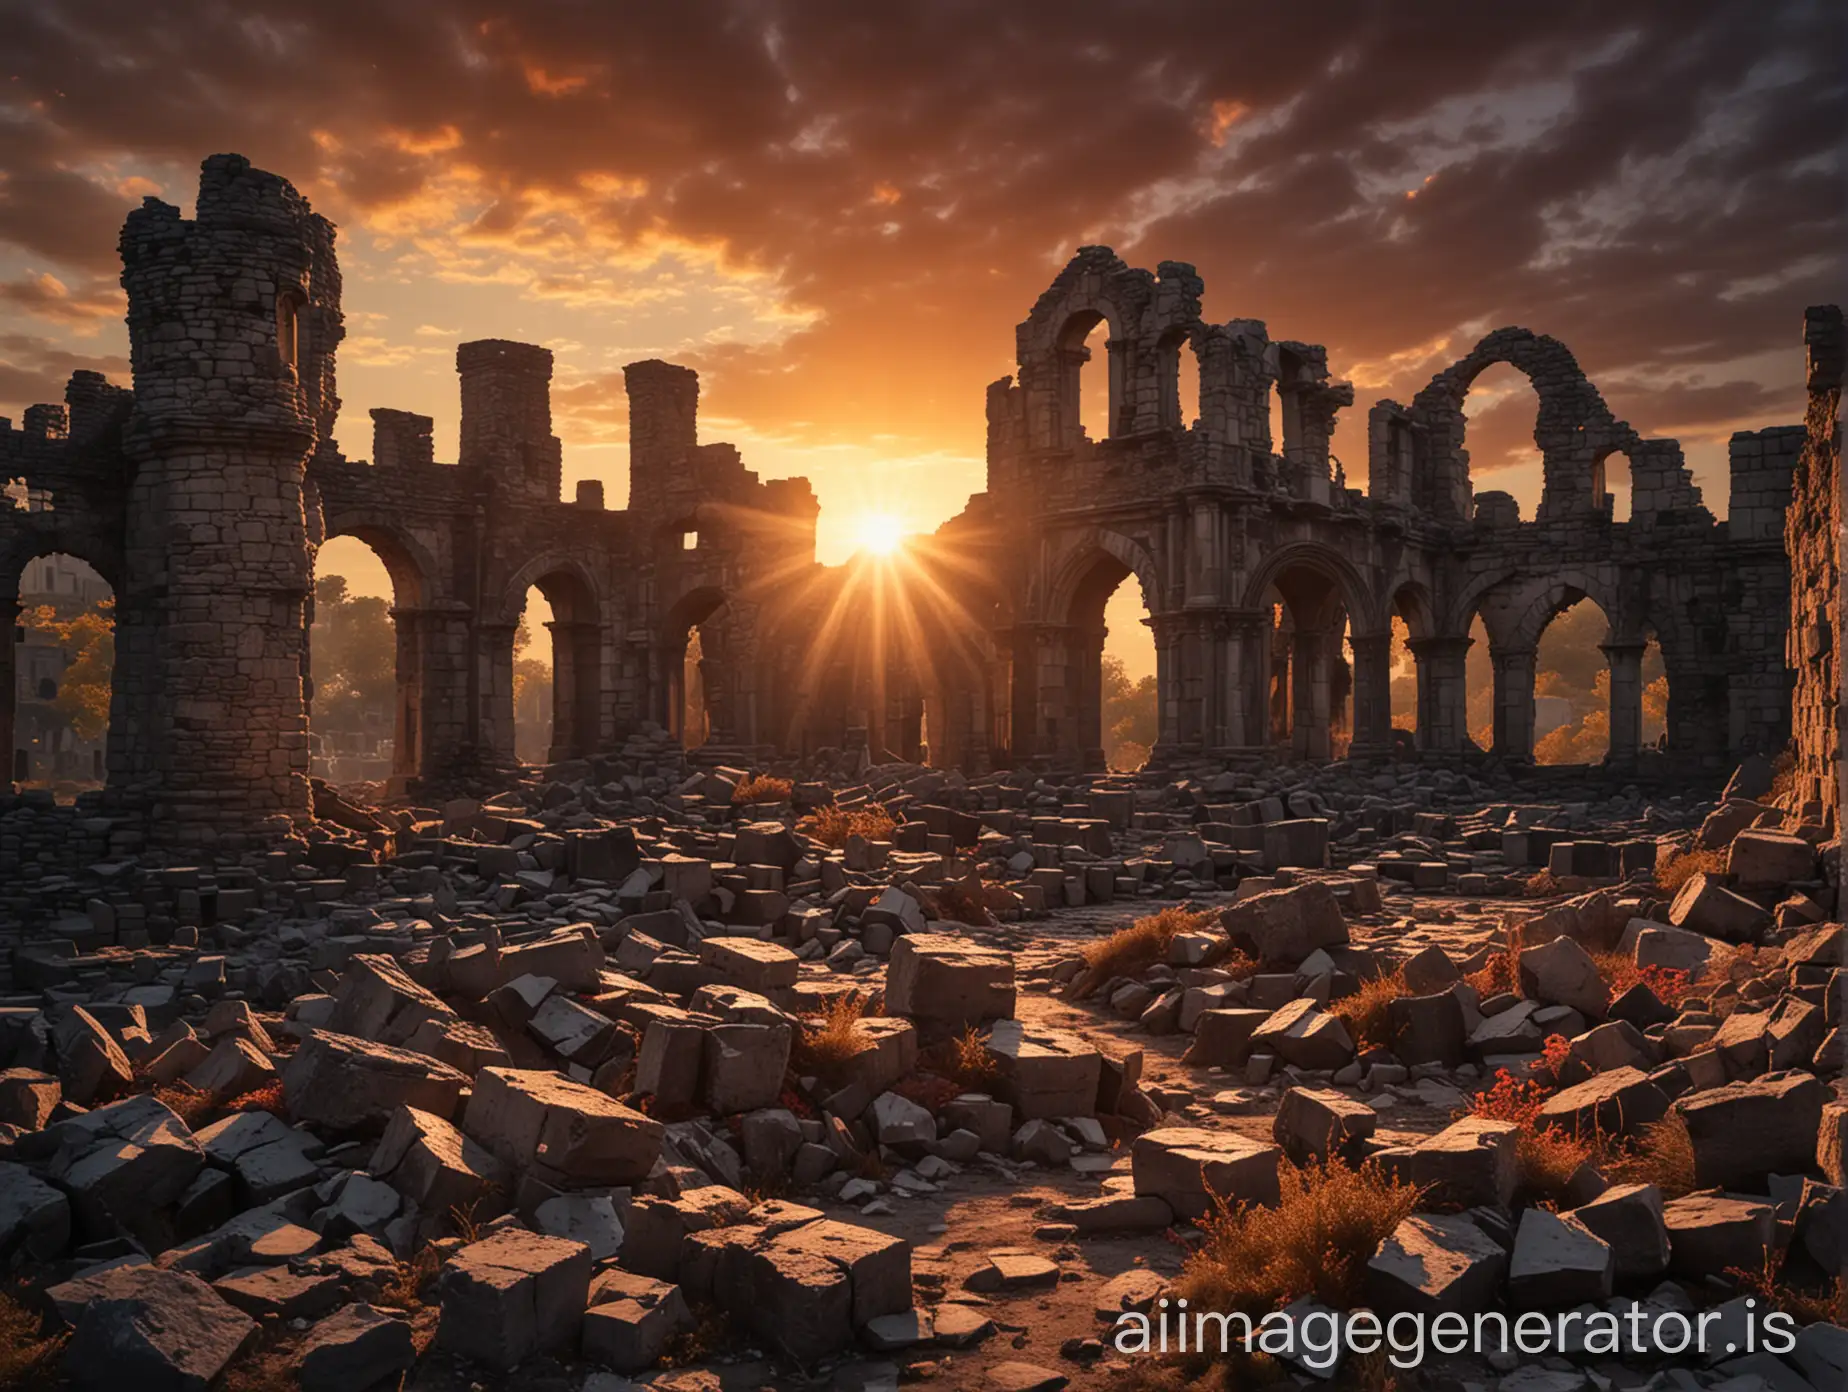 a castle architecture not destroyed and a heap of ruins; using the sunlight of dawn to light up the dark colors of the ruins, highlighting the bright colors of victory's dawn